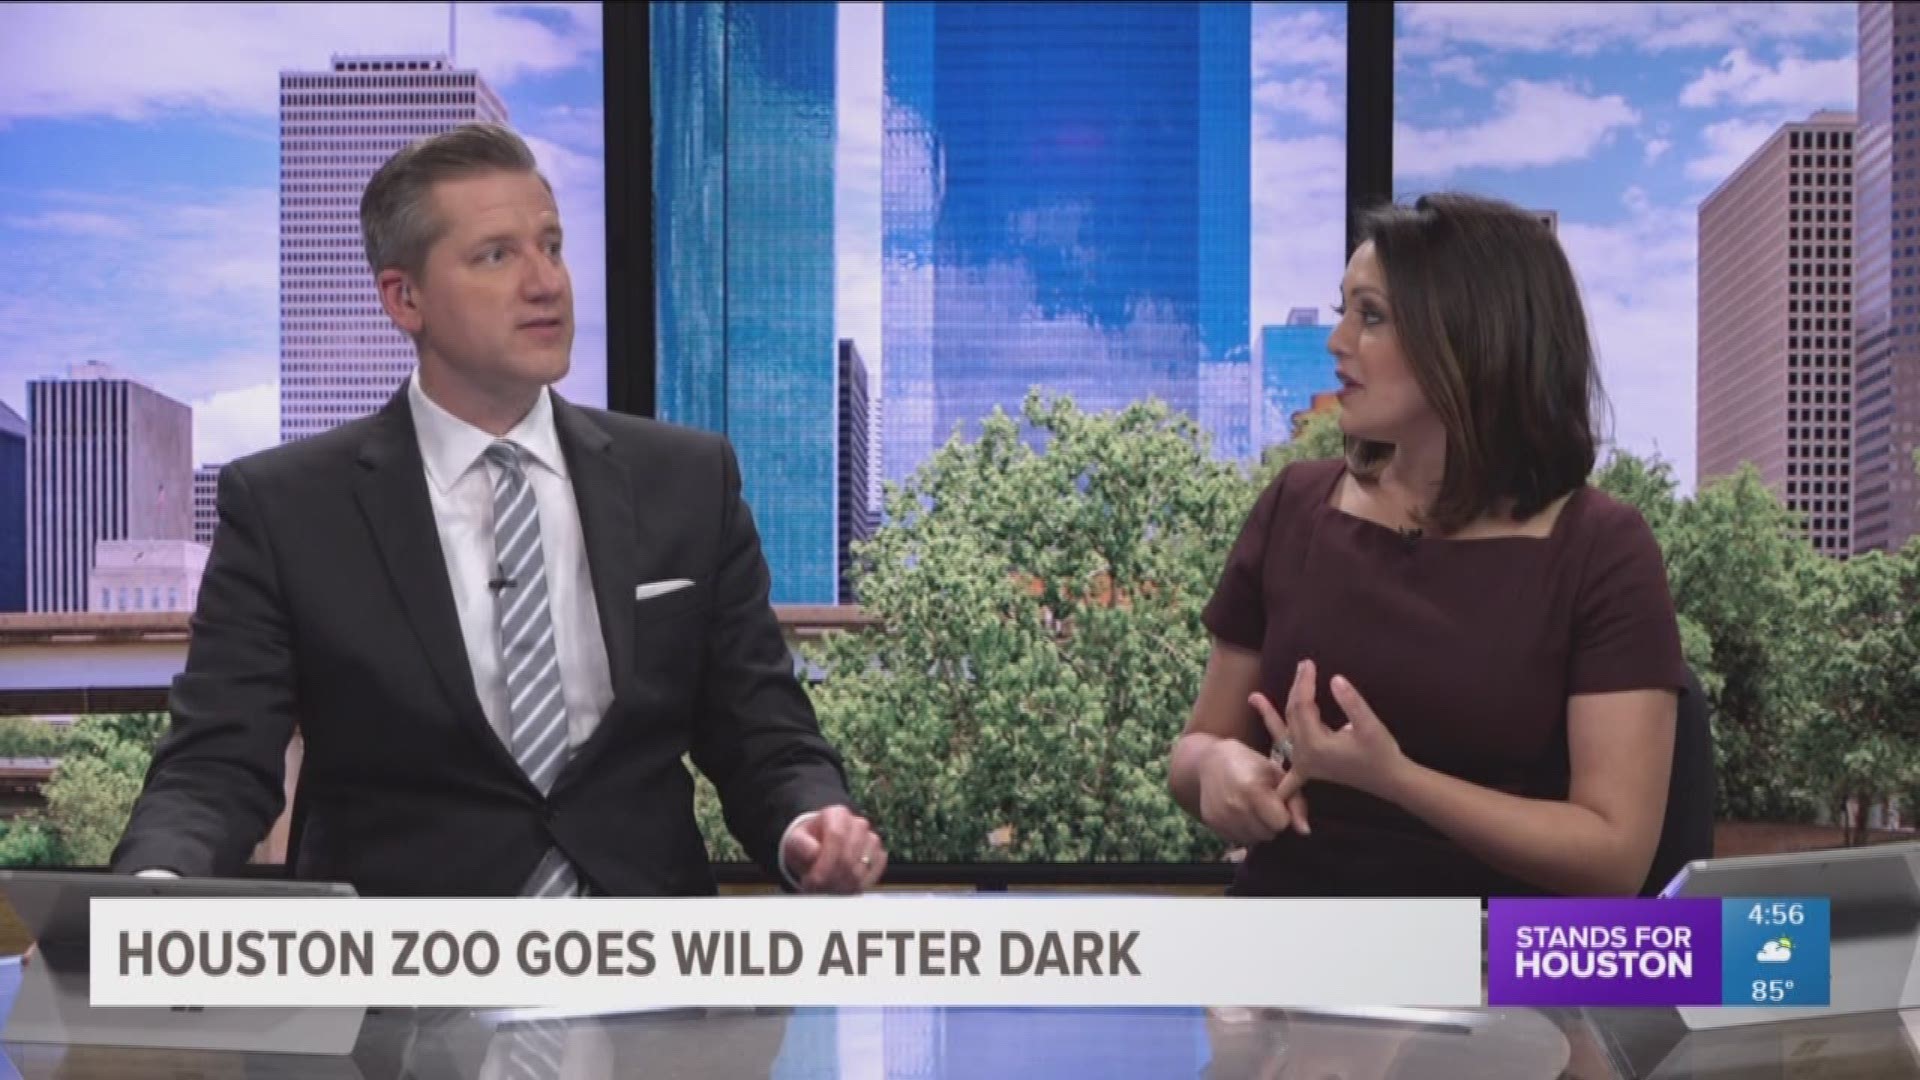 For three nights this summer, the Houston Zoo is giving adult visitors a chance to see the animals, and additional entertainment, after hours.